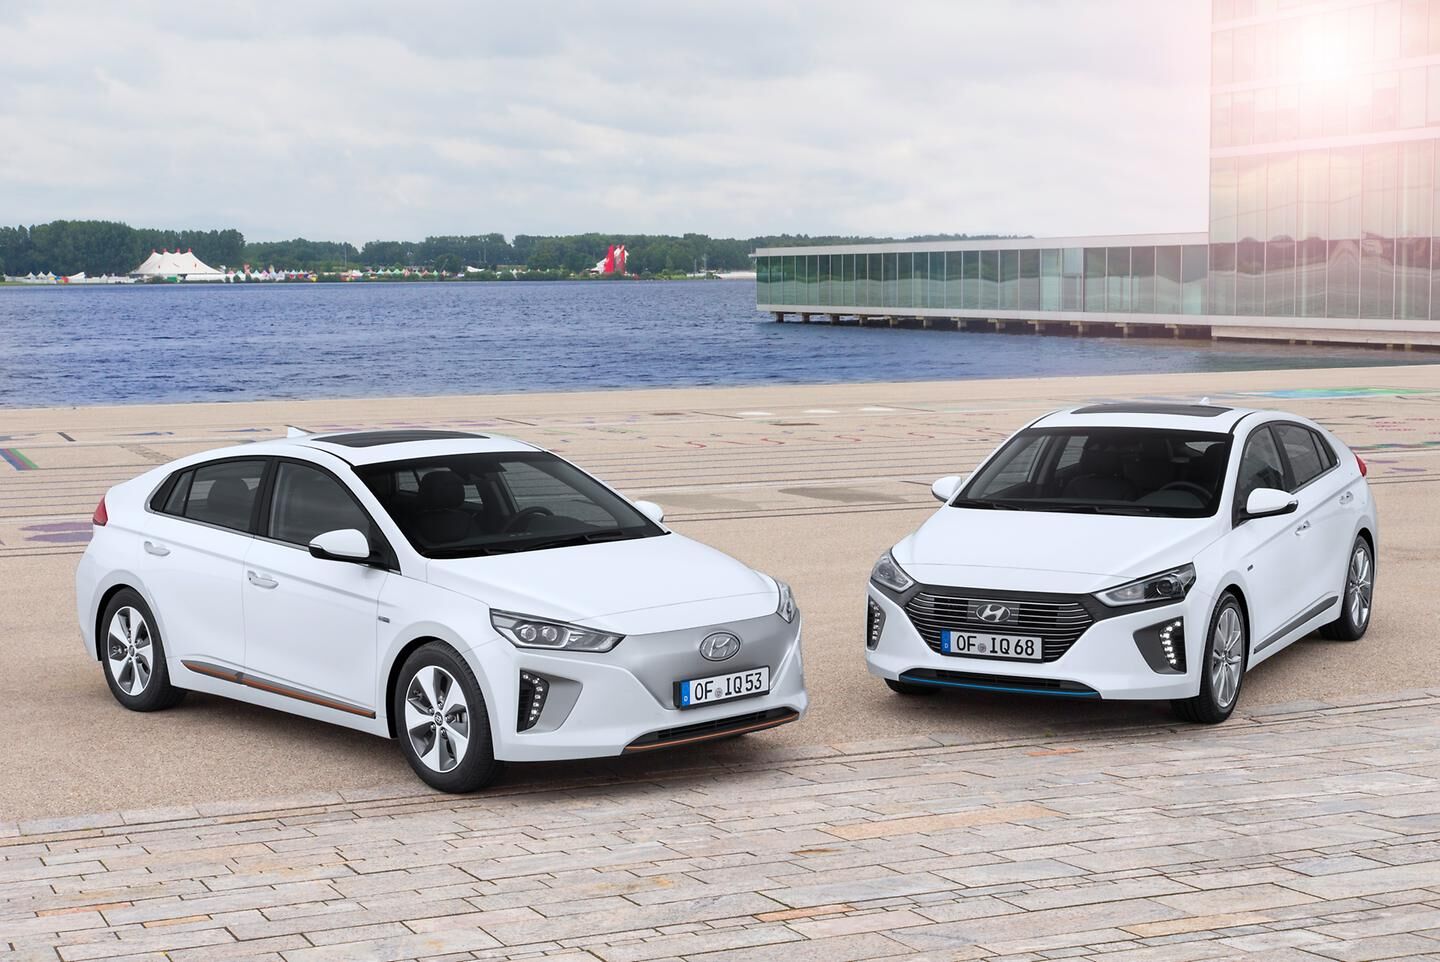 Knorretje boiler Recyclen Study confirms high residual values of top-ranked Hyundai All-New IONIQ  Hybrid and IONIQ Electric